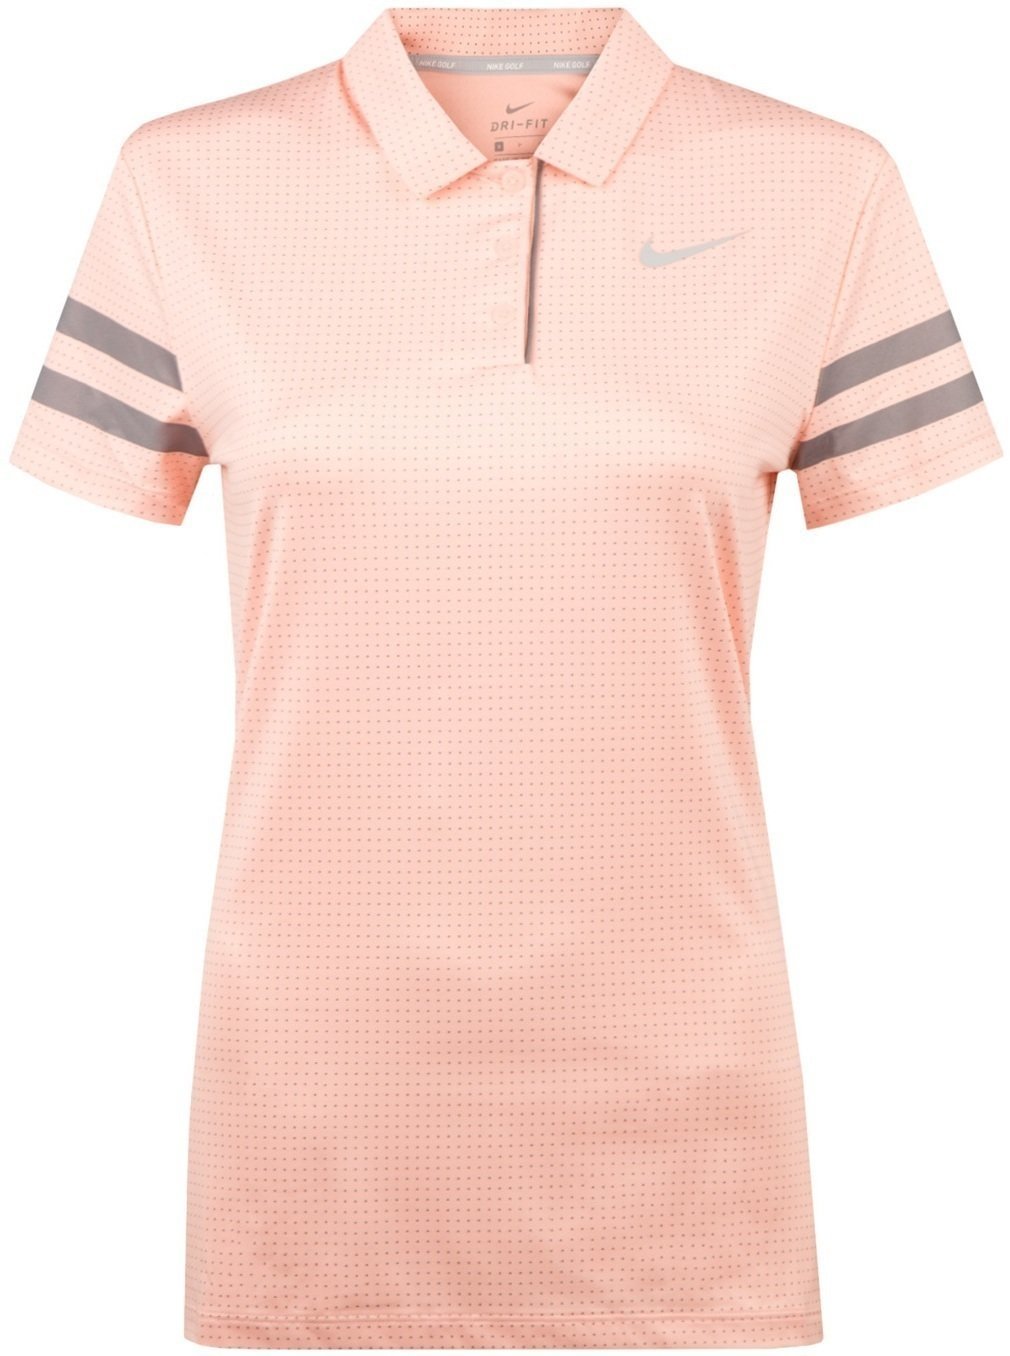 Polo majica Nike Dri-Fit Printed Womens Polo Storm Pink/Anthracite/White XS